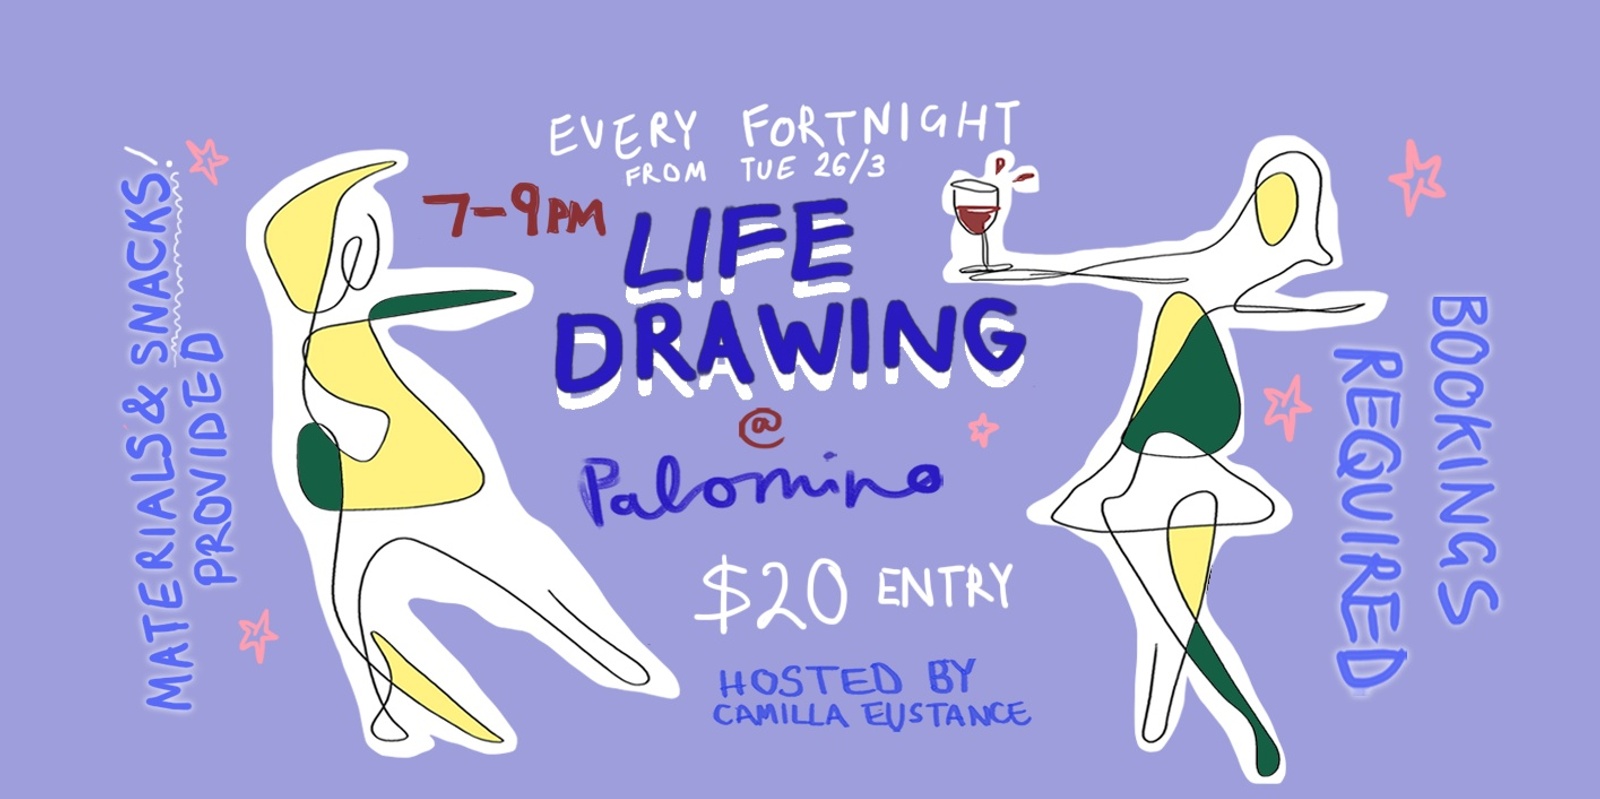 Banner image for Fortnightly Life Drawing at Palomino